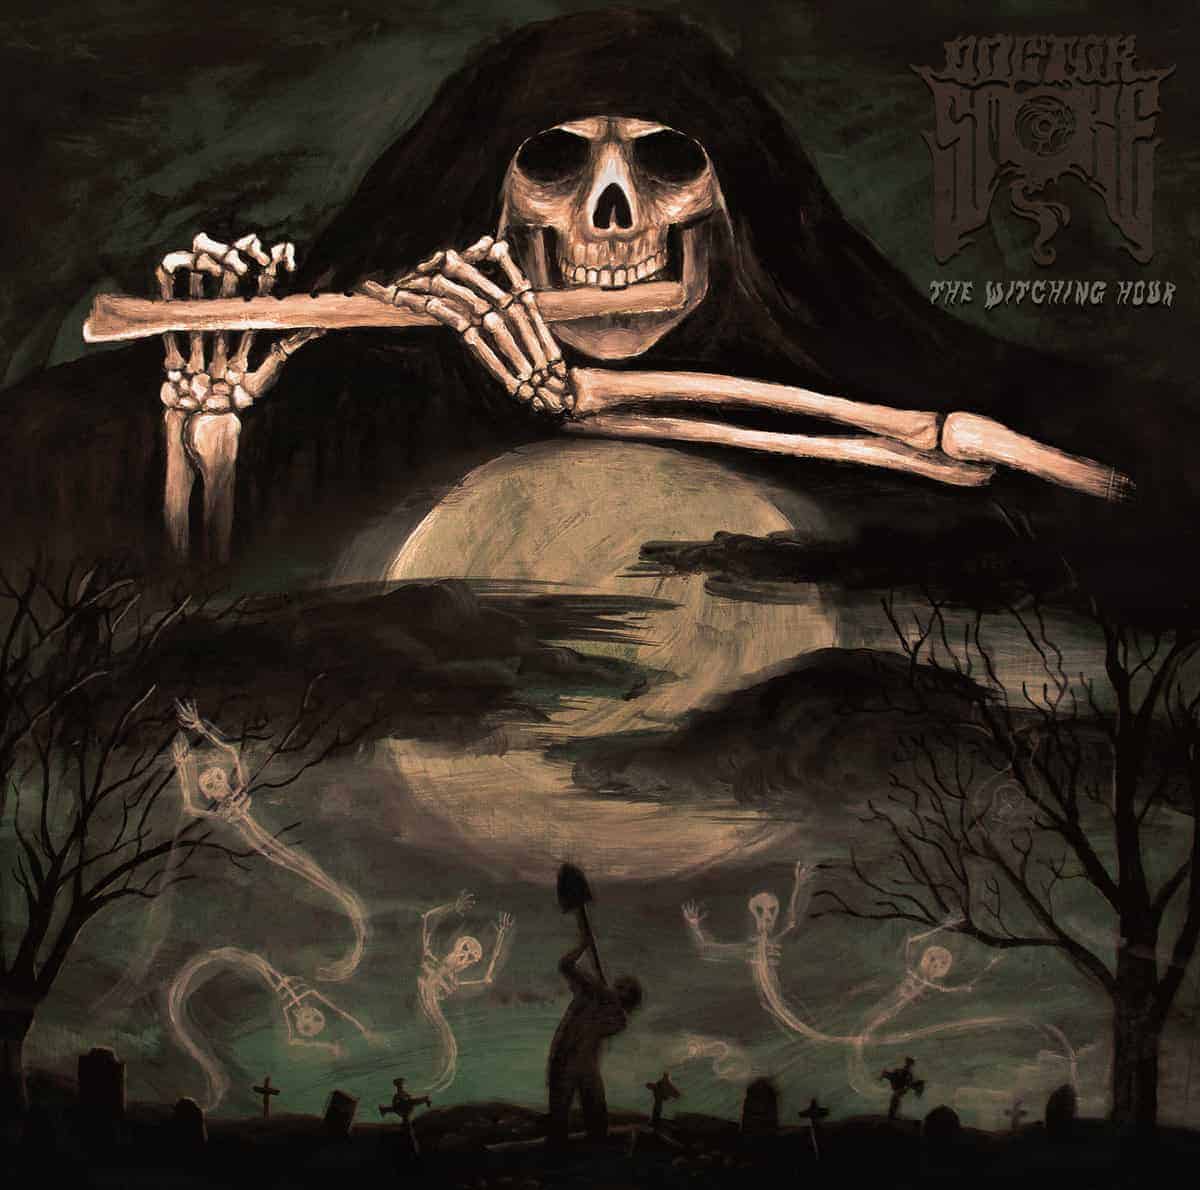 Doctor Smoke - The Witching Hour col.LP (Totem Cat) ﻿The Witching Hour by Doctor Smoke